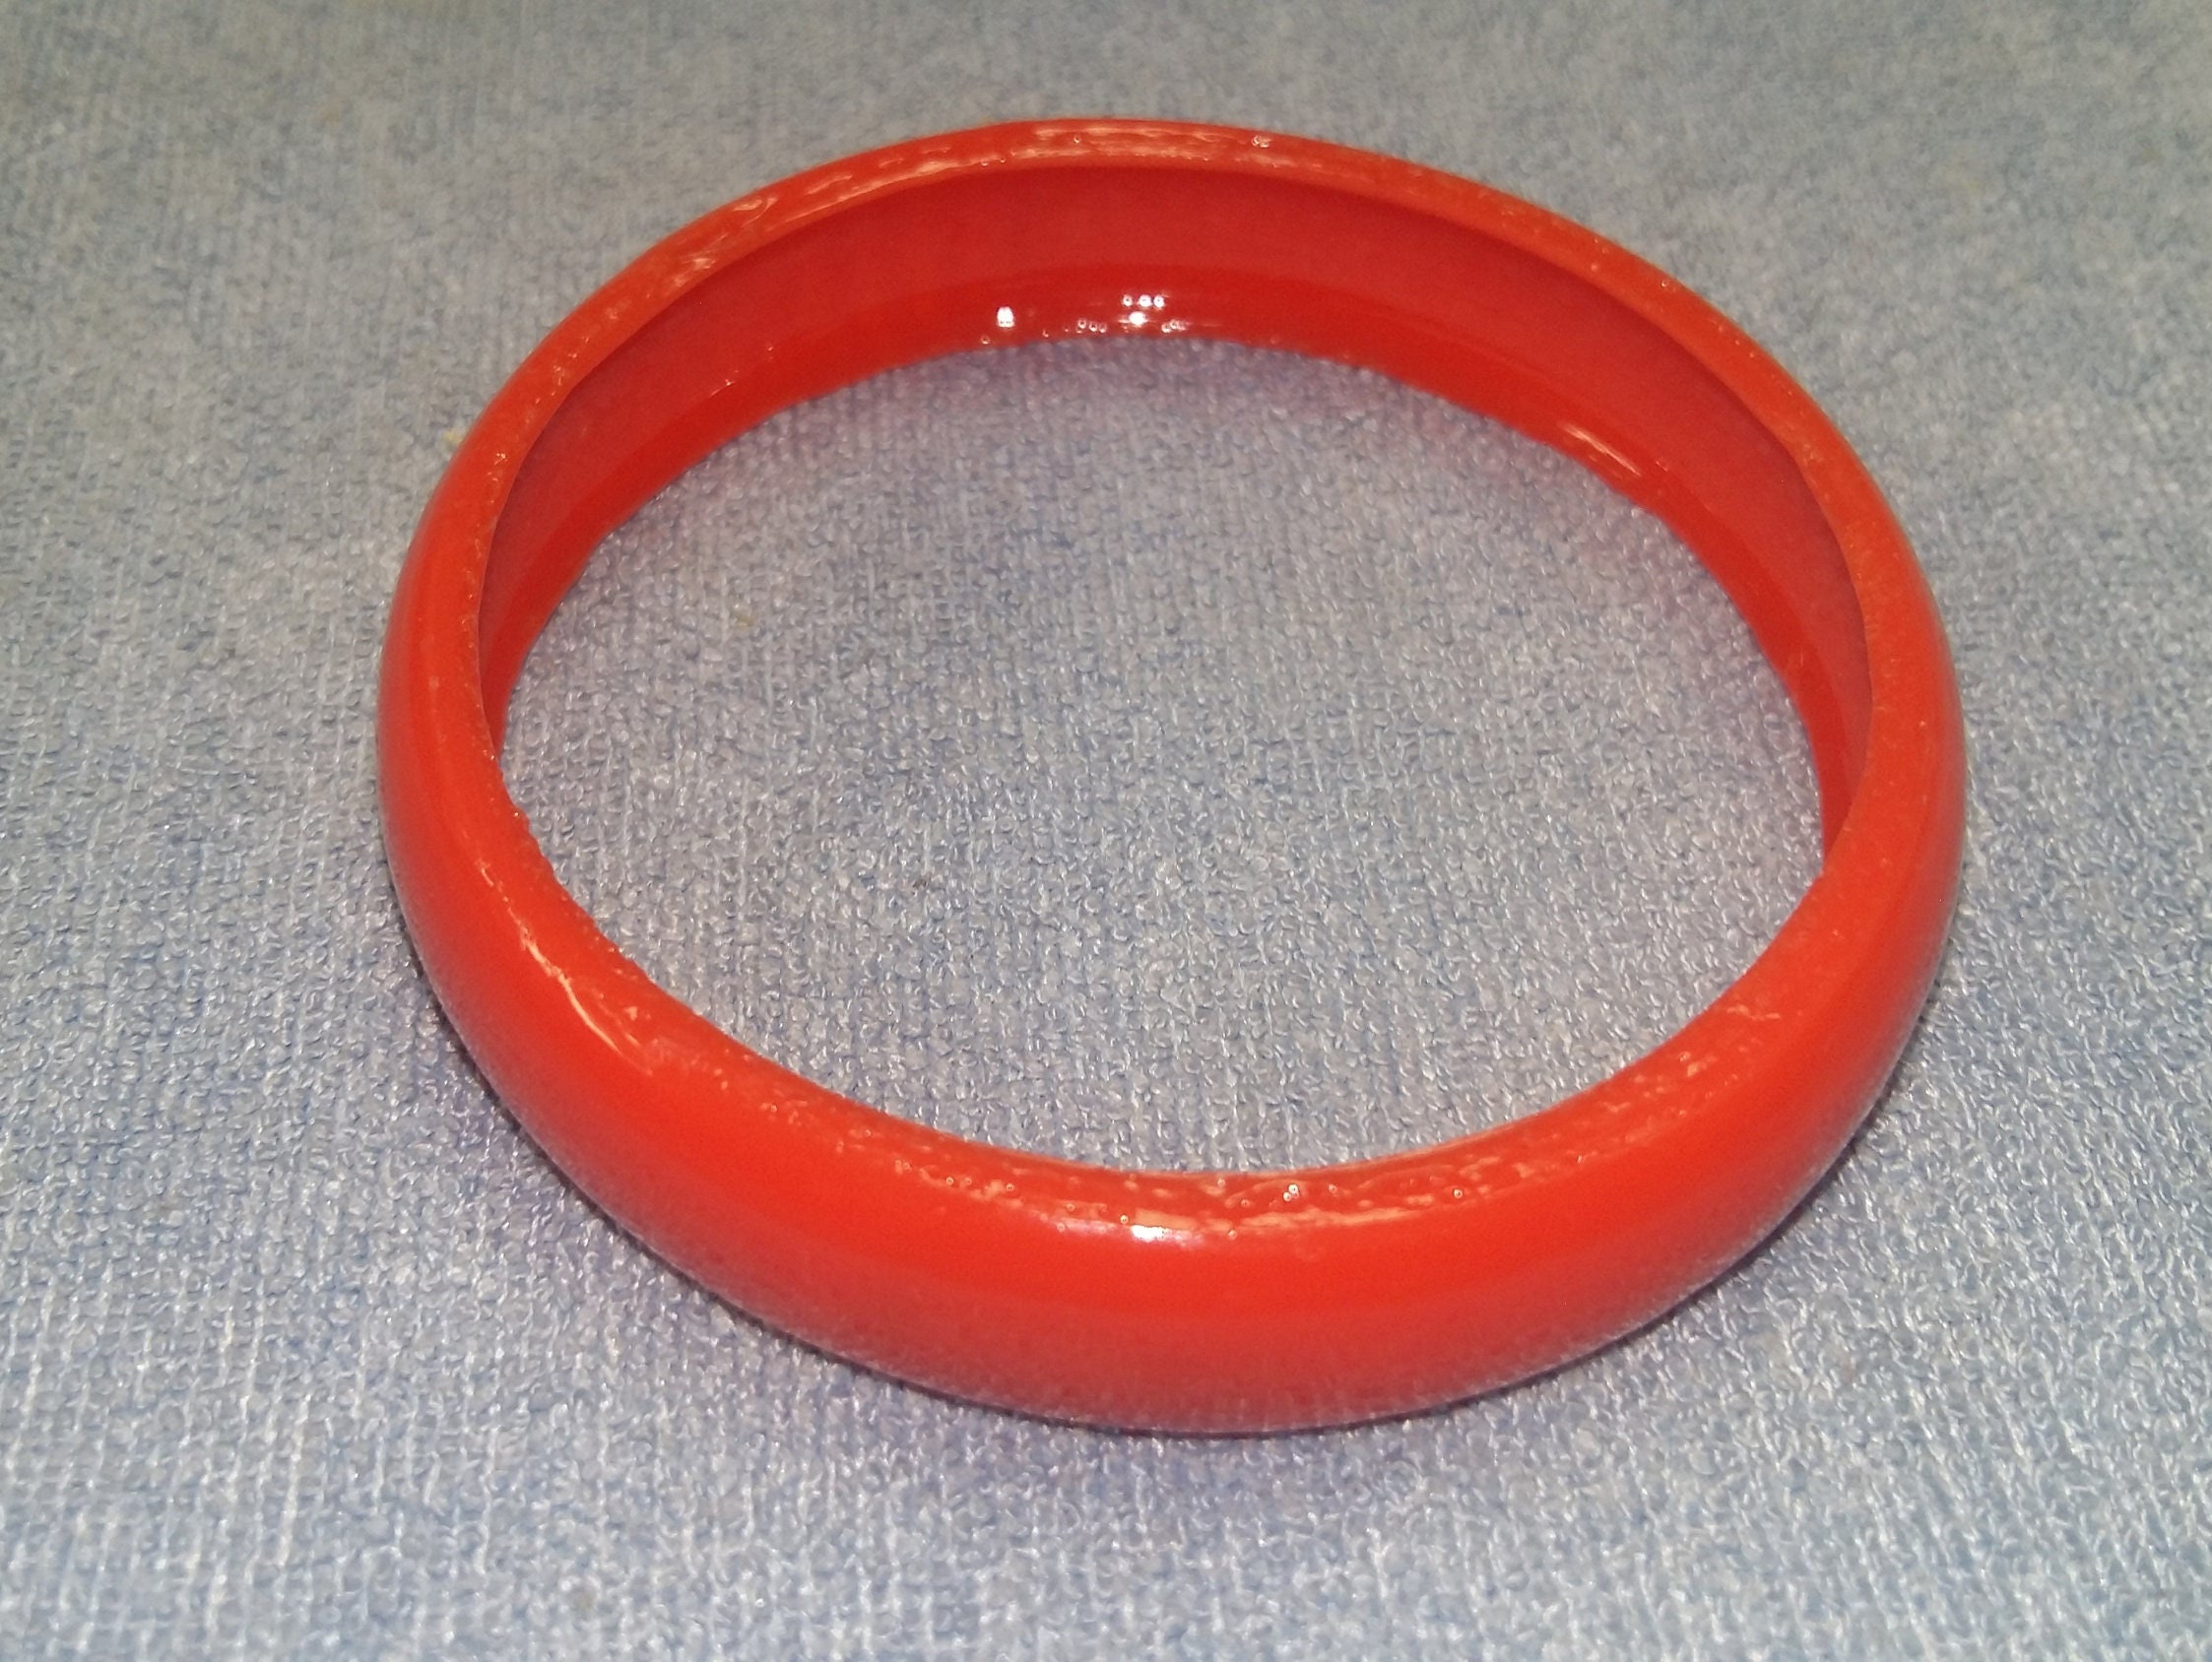 GORGEOUS PINK RED Bangles, Cute 3D Printed Plastic Bracelet